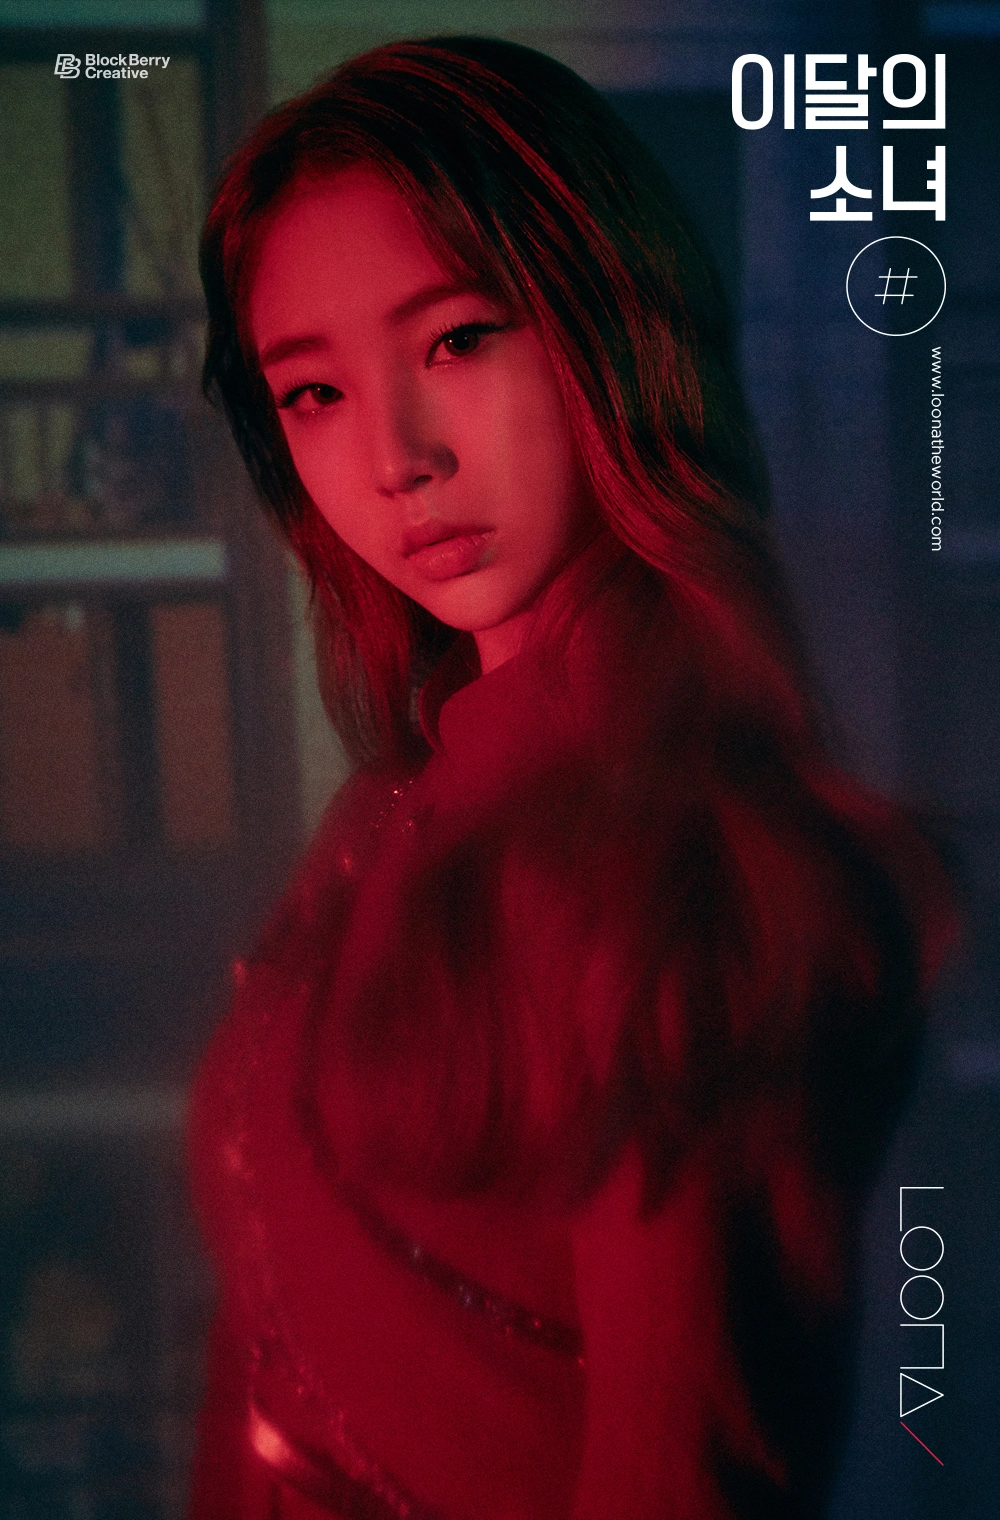 Loona # Hash Yeojin Concept Teaser Picture Image Photo Kpop K-Concept 1